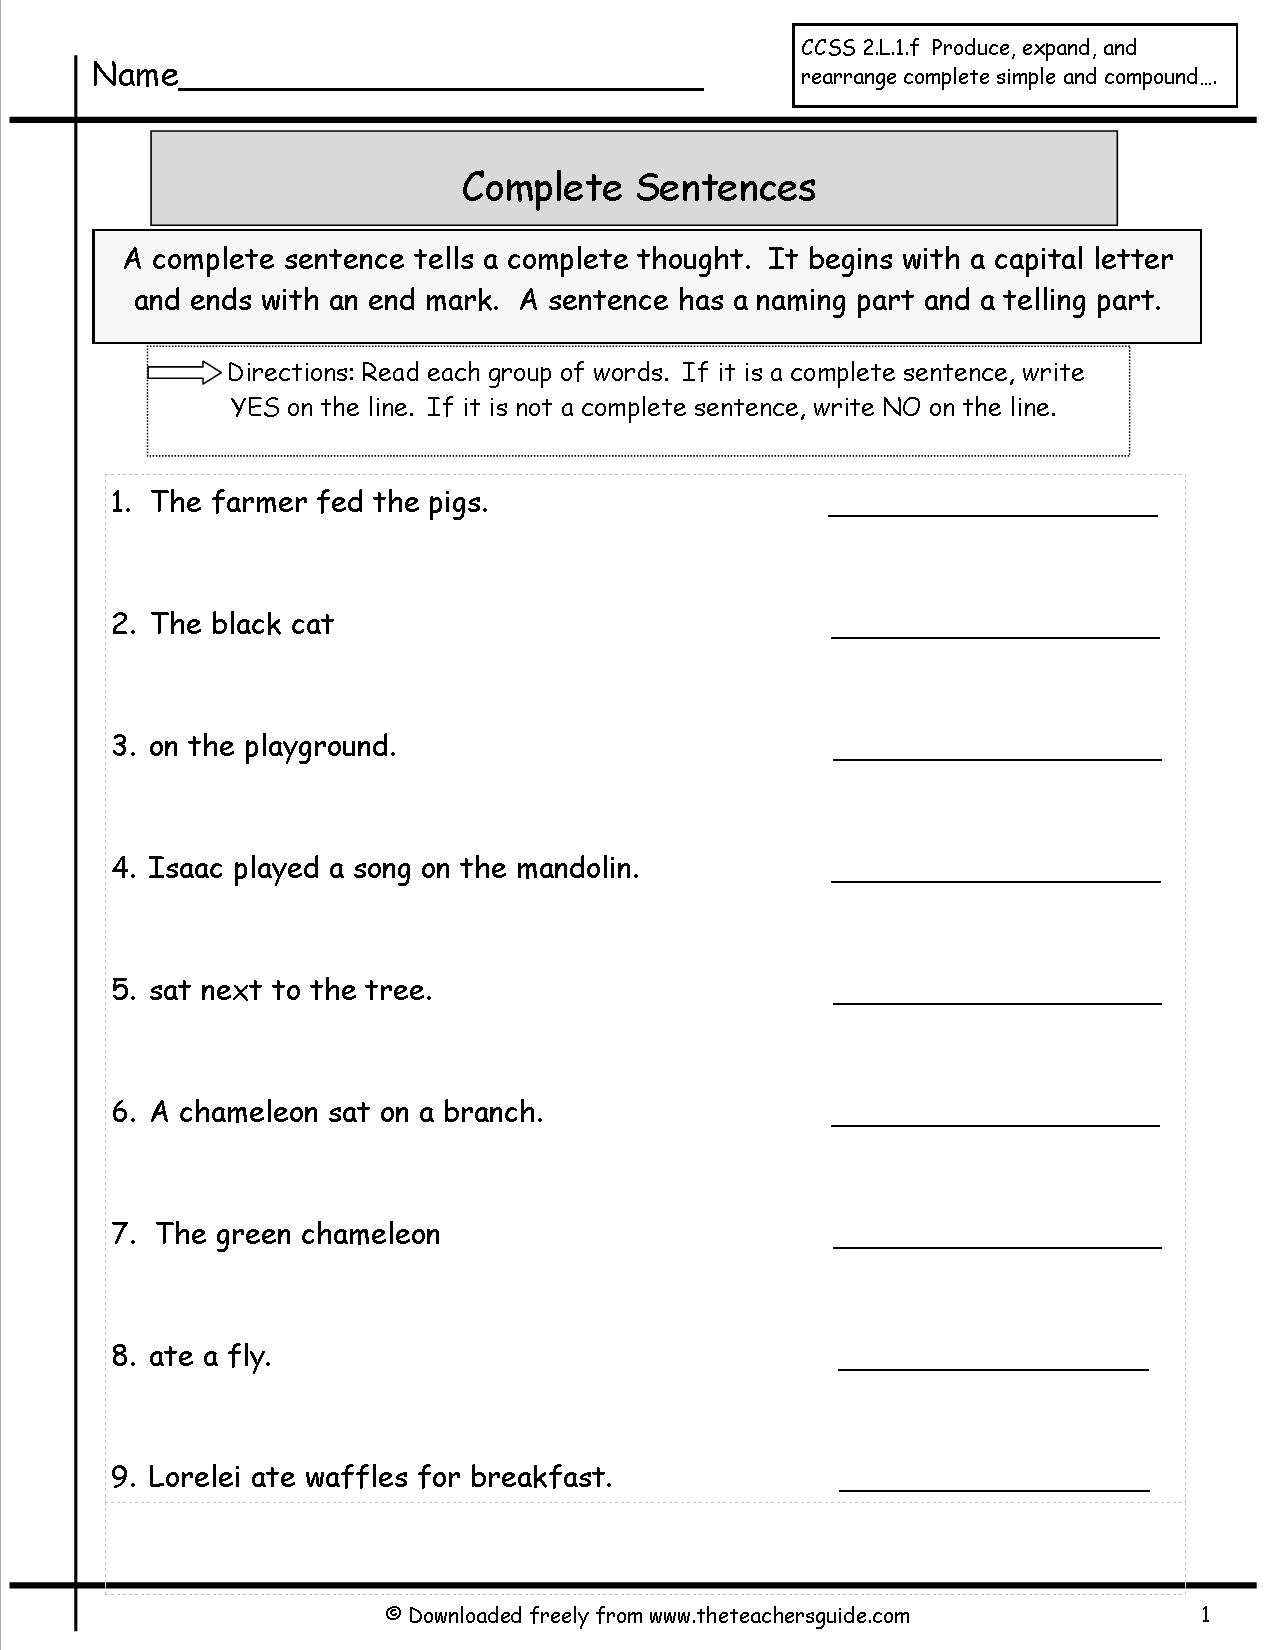 15-best-images-of-writing-skills-worksheets-handwriting-skills-worksheets-free-sentence